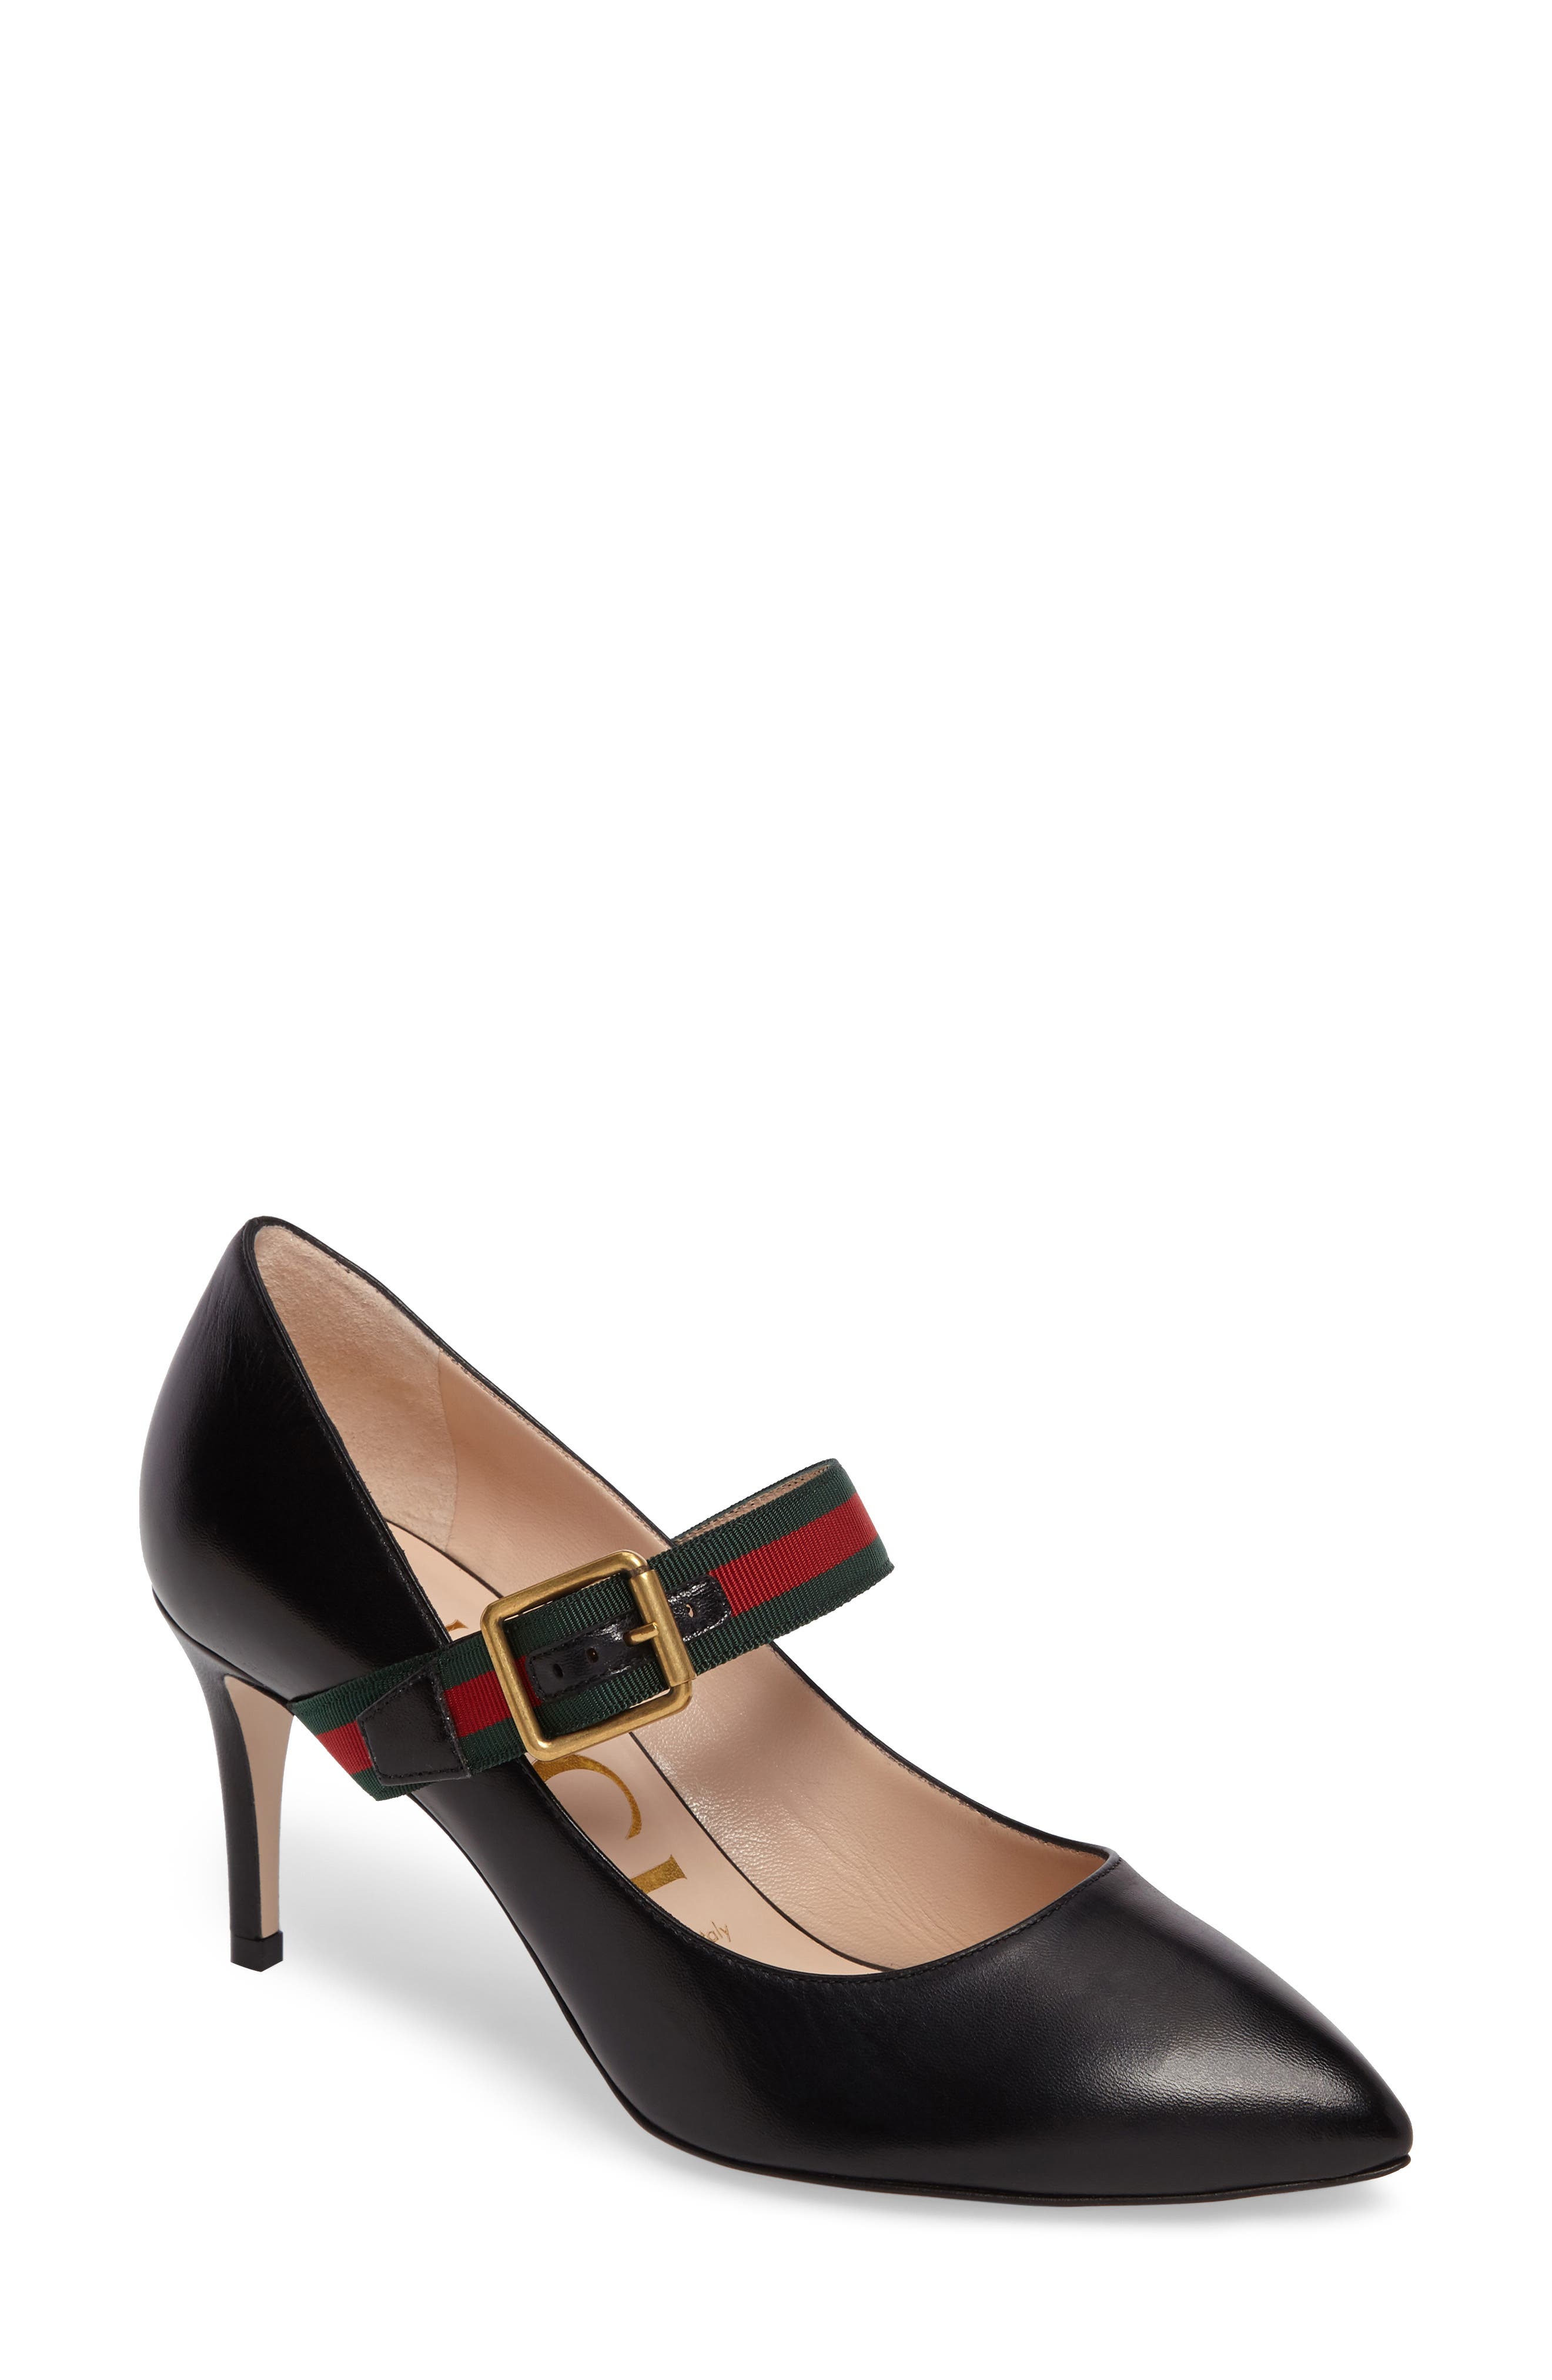 gucci mary jane shoes